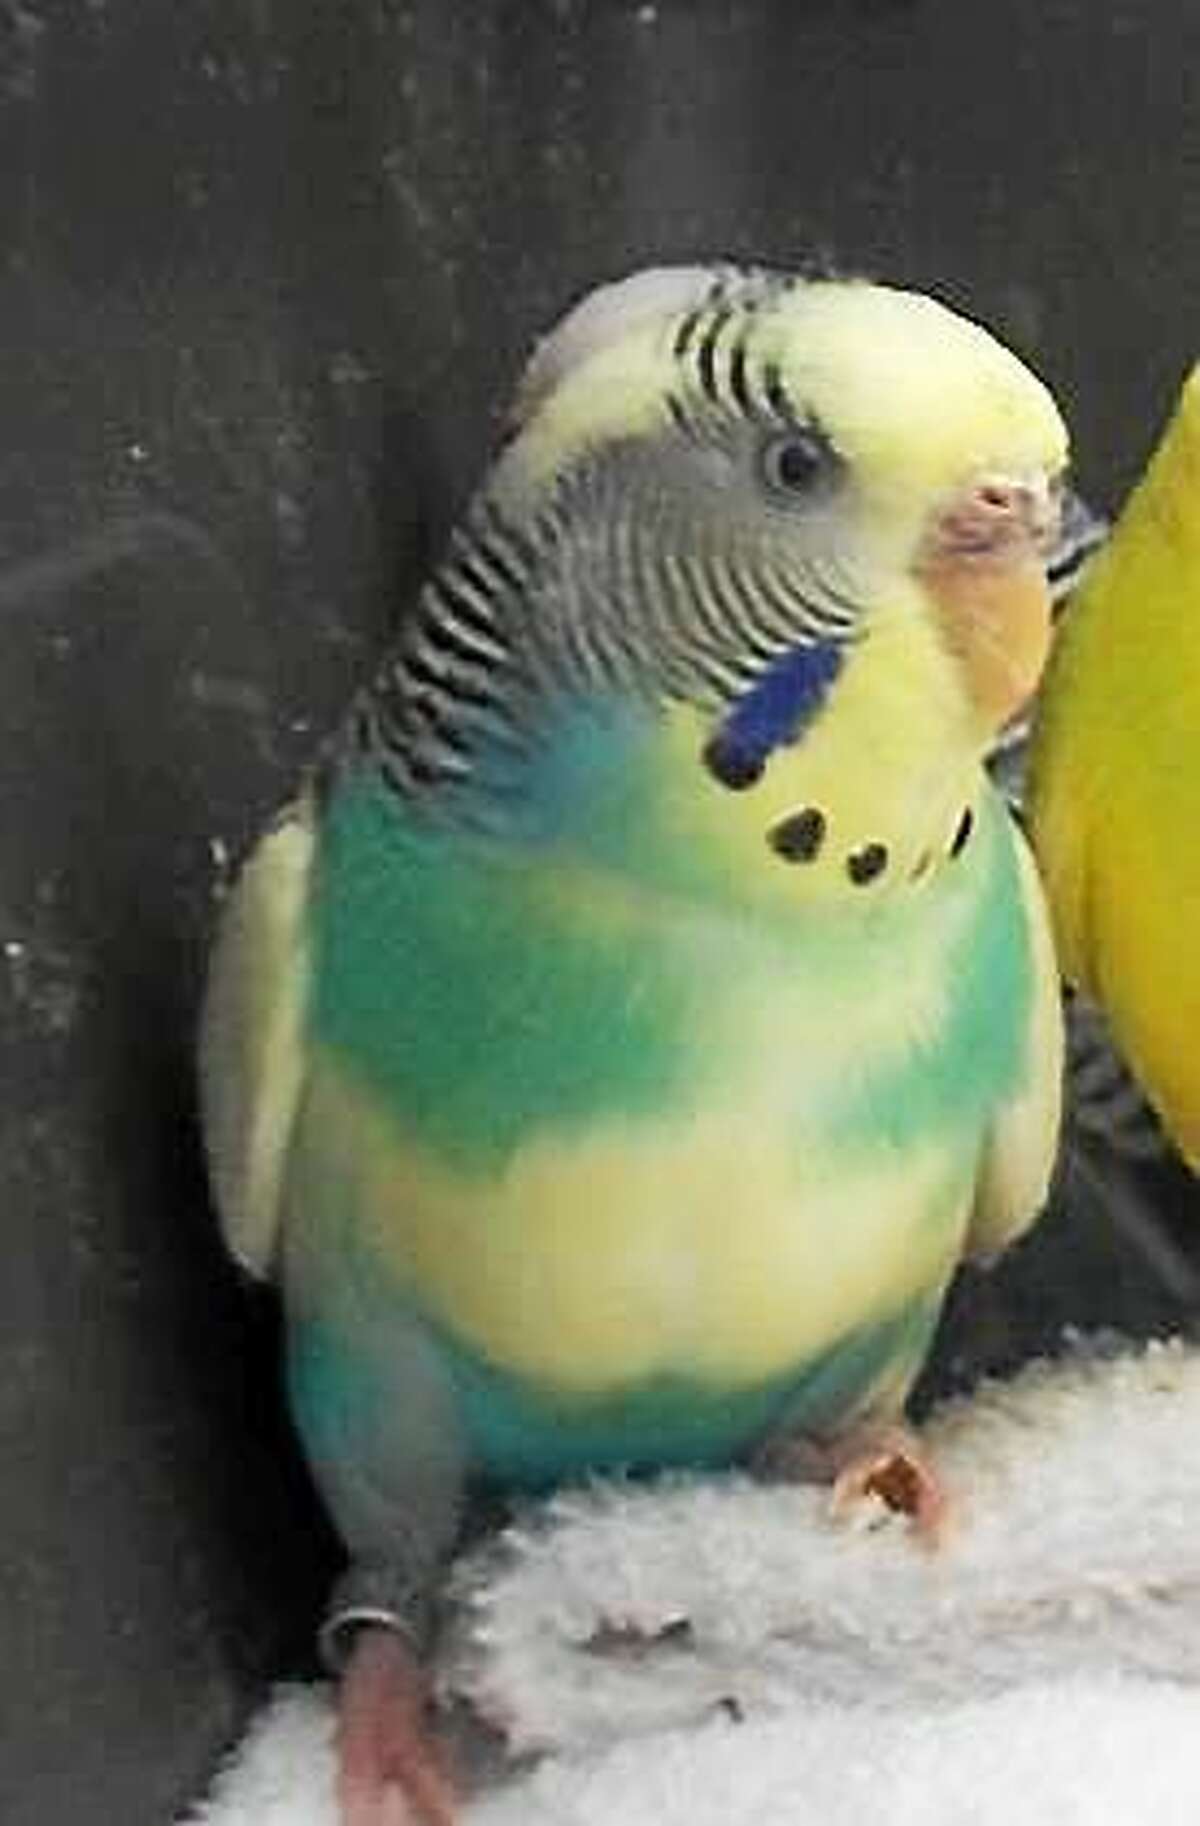 Rainbow birdie There are six parakeets available in our bird booth at the Newington shelter ranging in age from 3 months to 2 years. They are a beautiful array of light green, yellow and aqua bringing tropical lushness right to your fingertips. Get to know our little warm-footed friends and bring a little sunshine and song into your home today. Inquiries for adoption should be made at the Connecticut Humane Society located at 701 Russell Road in Newington or by calling (860) 594-4500 or toll free at 1-800-452-0114.